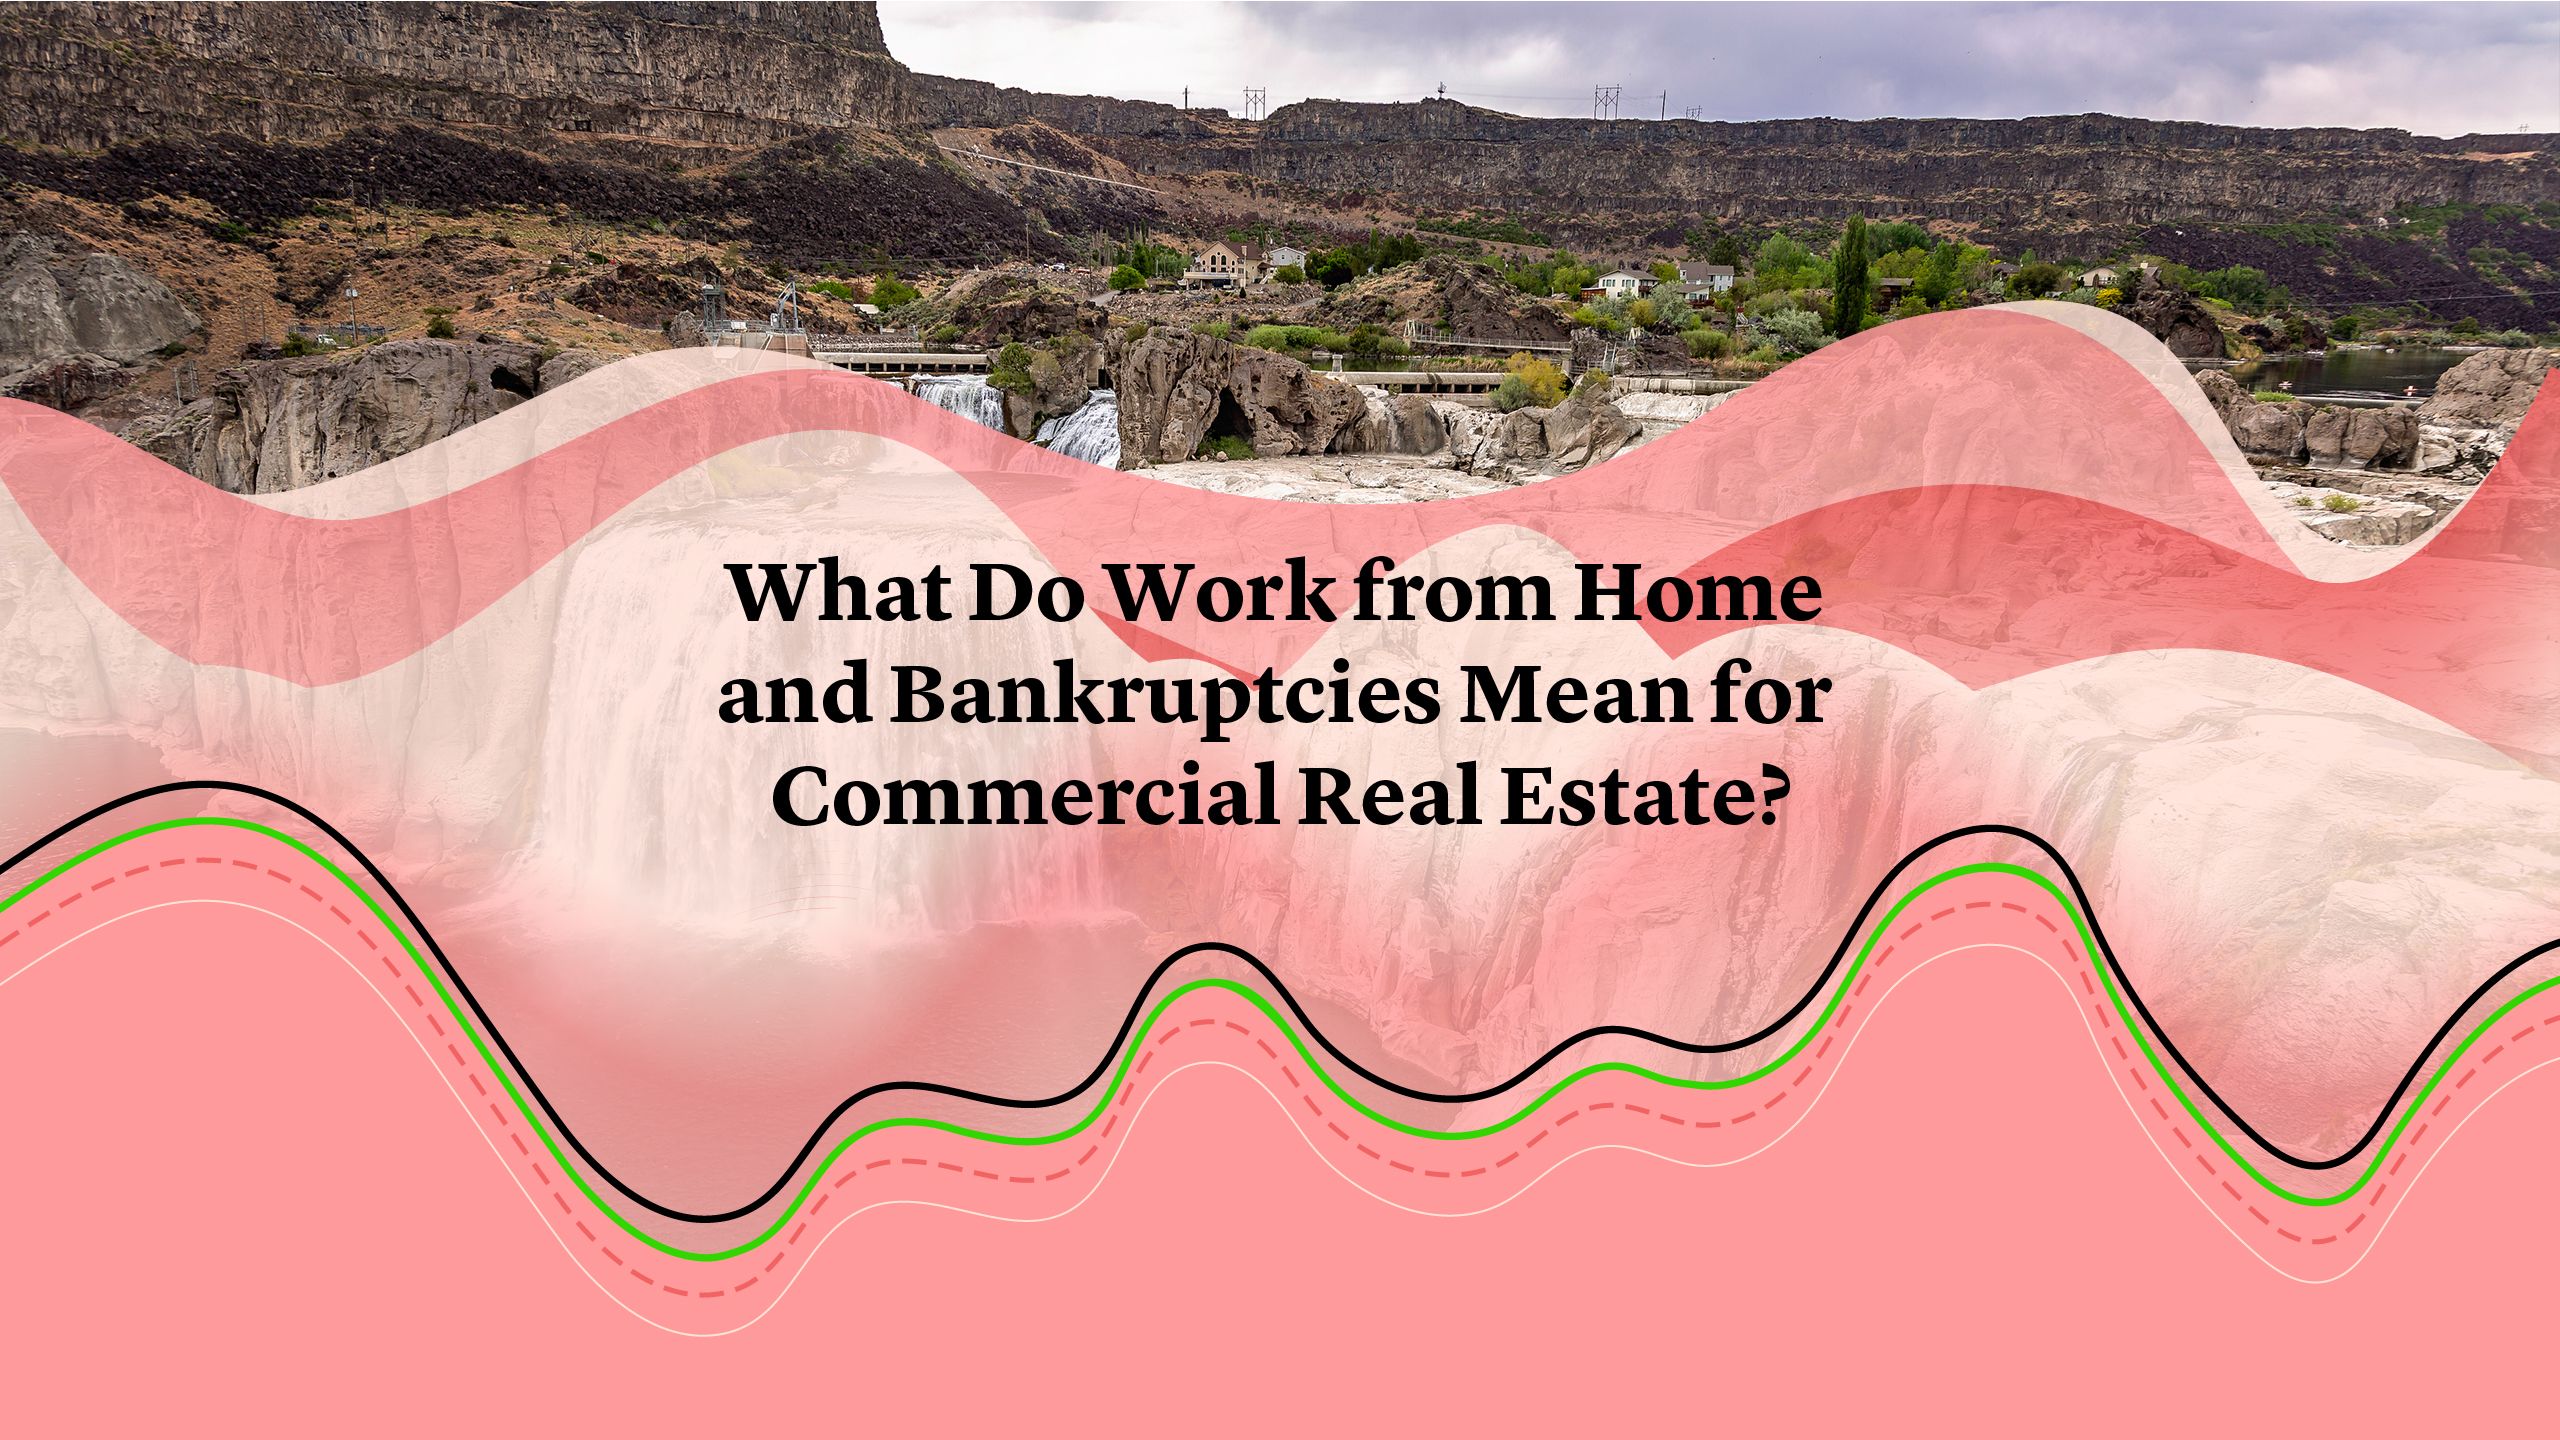 What Do Work from Home and Bankruptcies Mean for Commercial Real Estate?